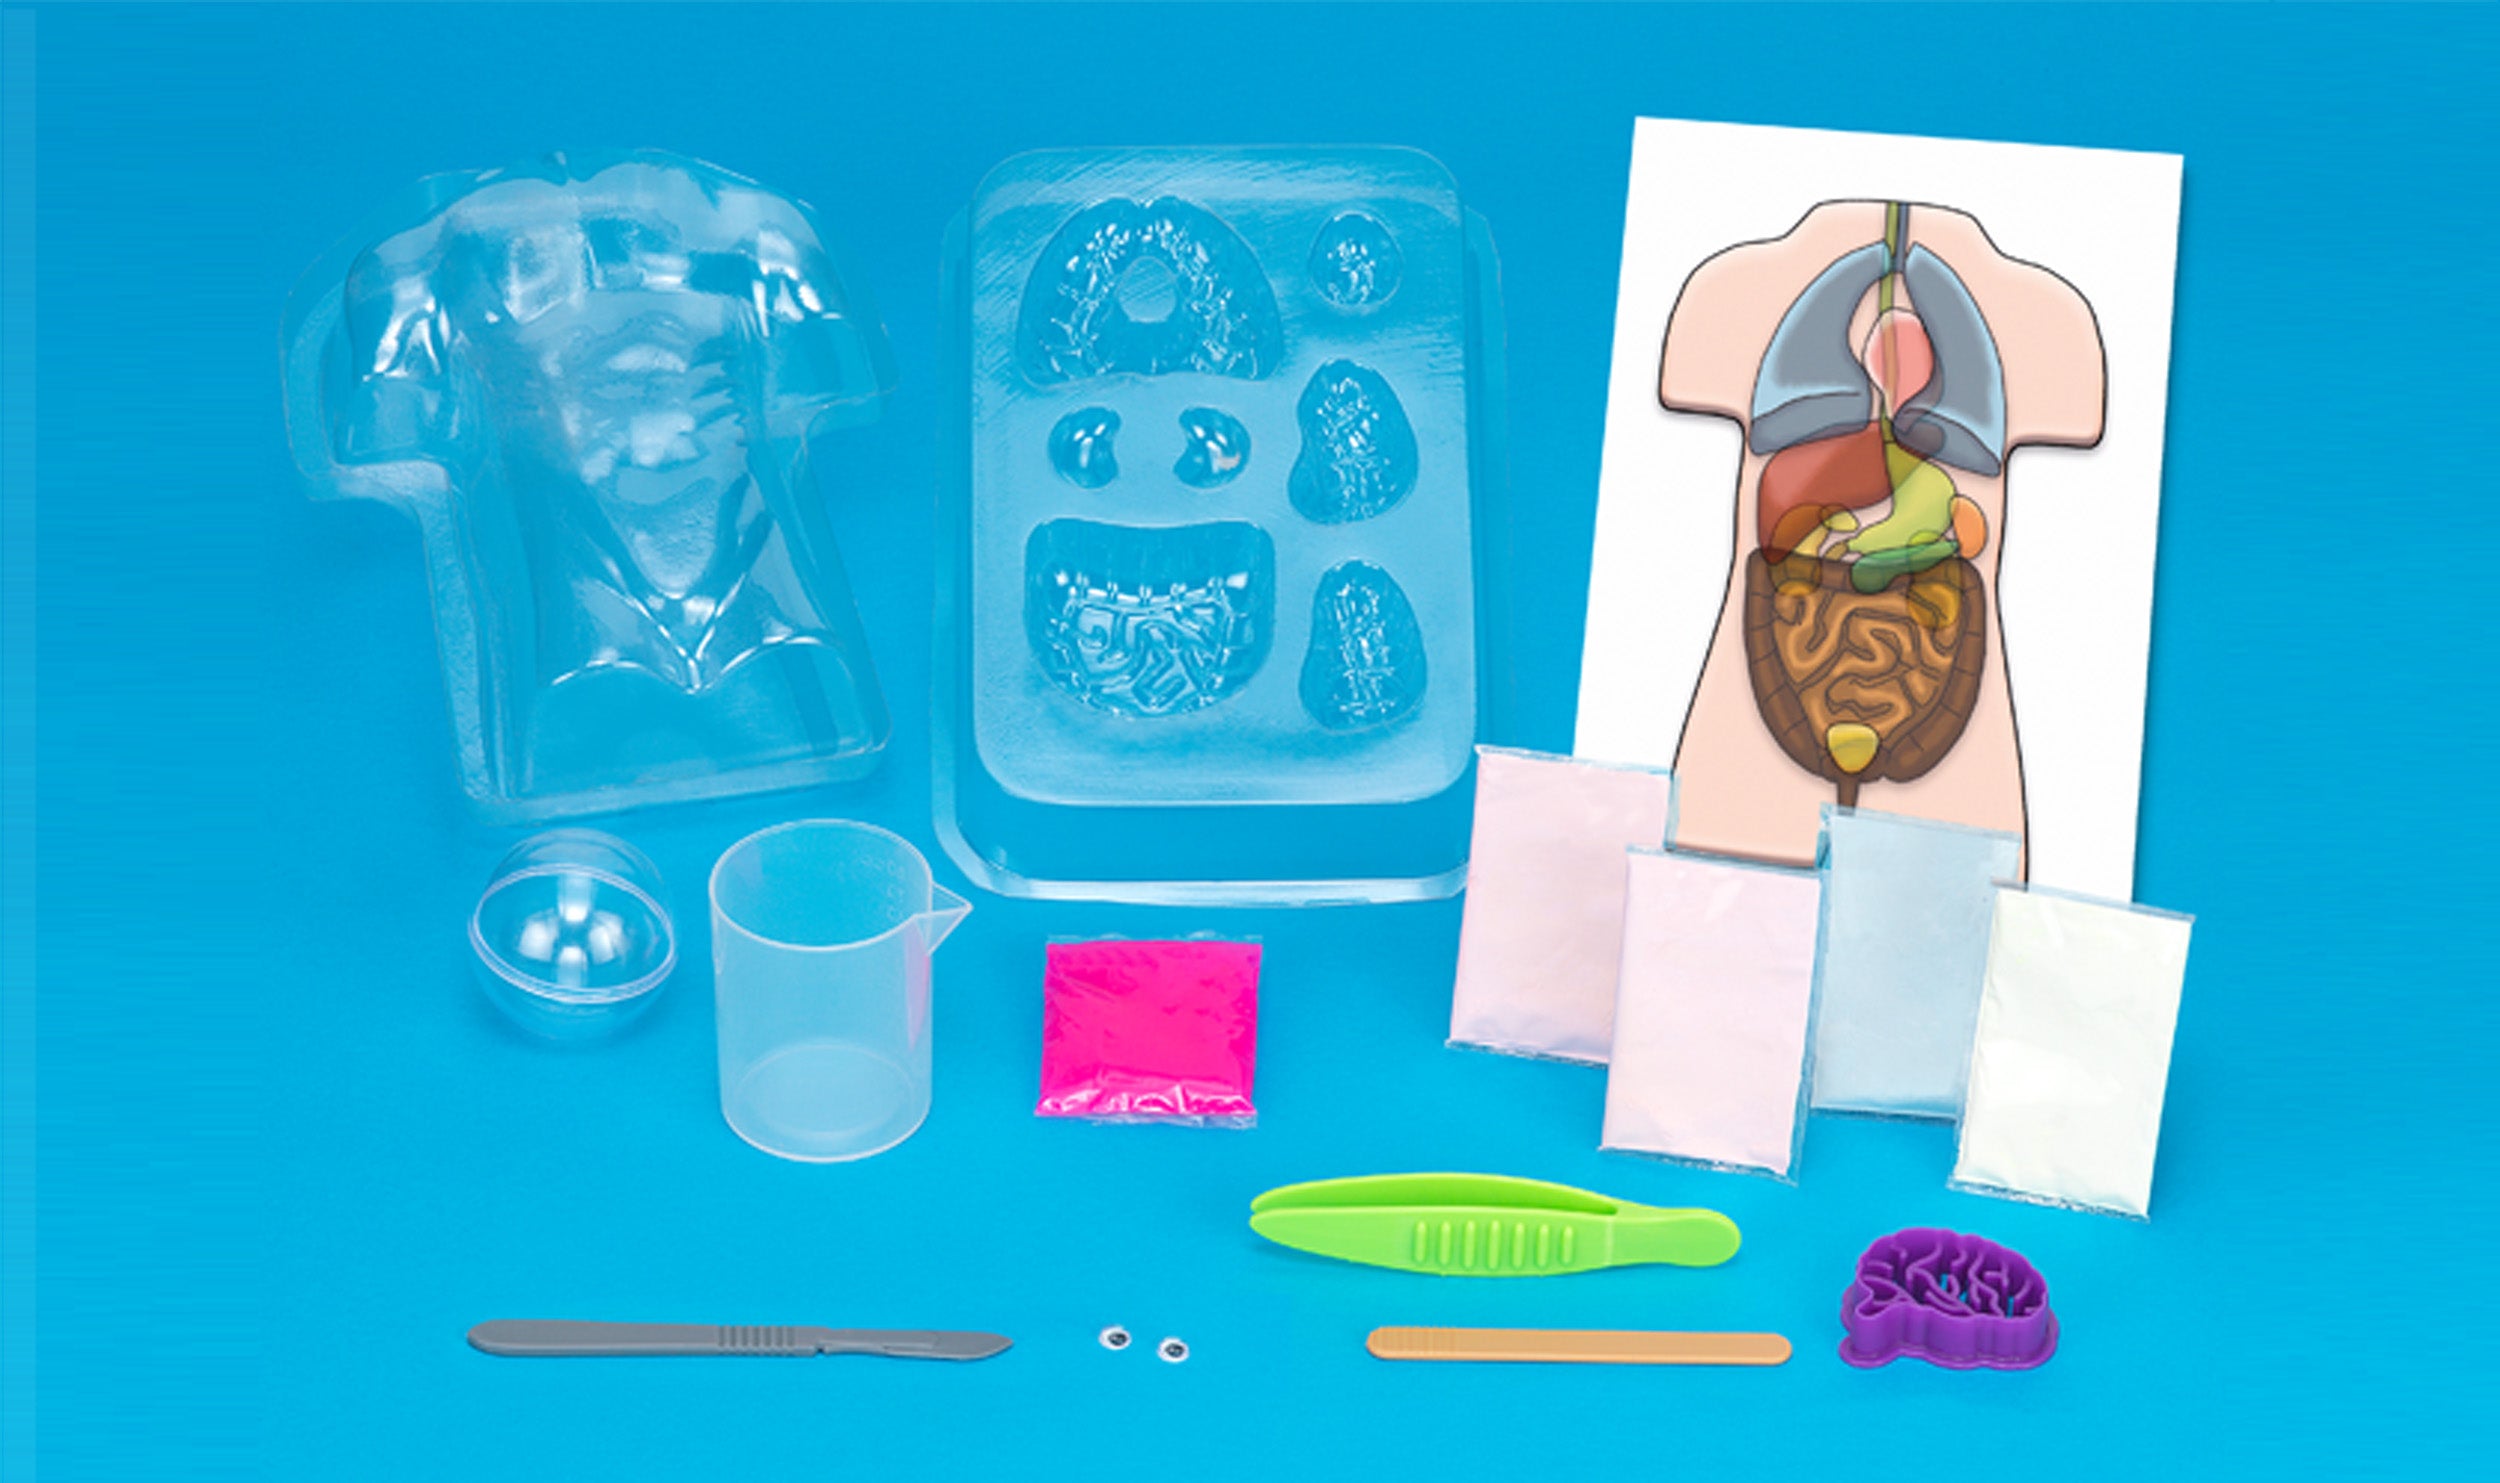 Gross Anatomy | Squishy Human Body Kaboodles Toy Store - Victoria